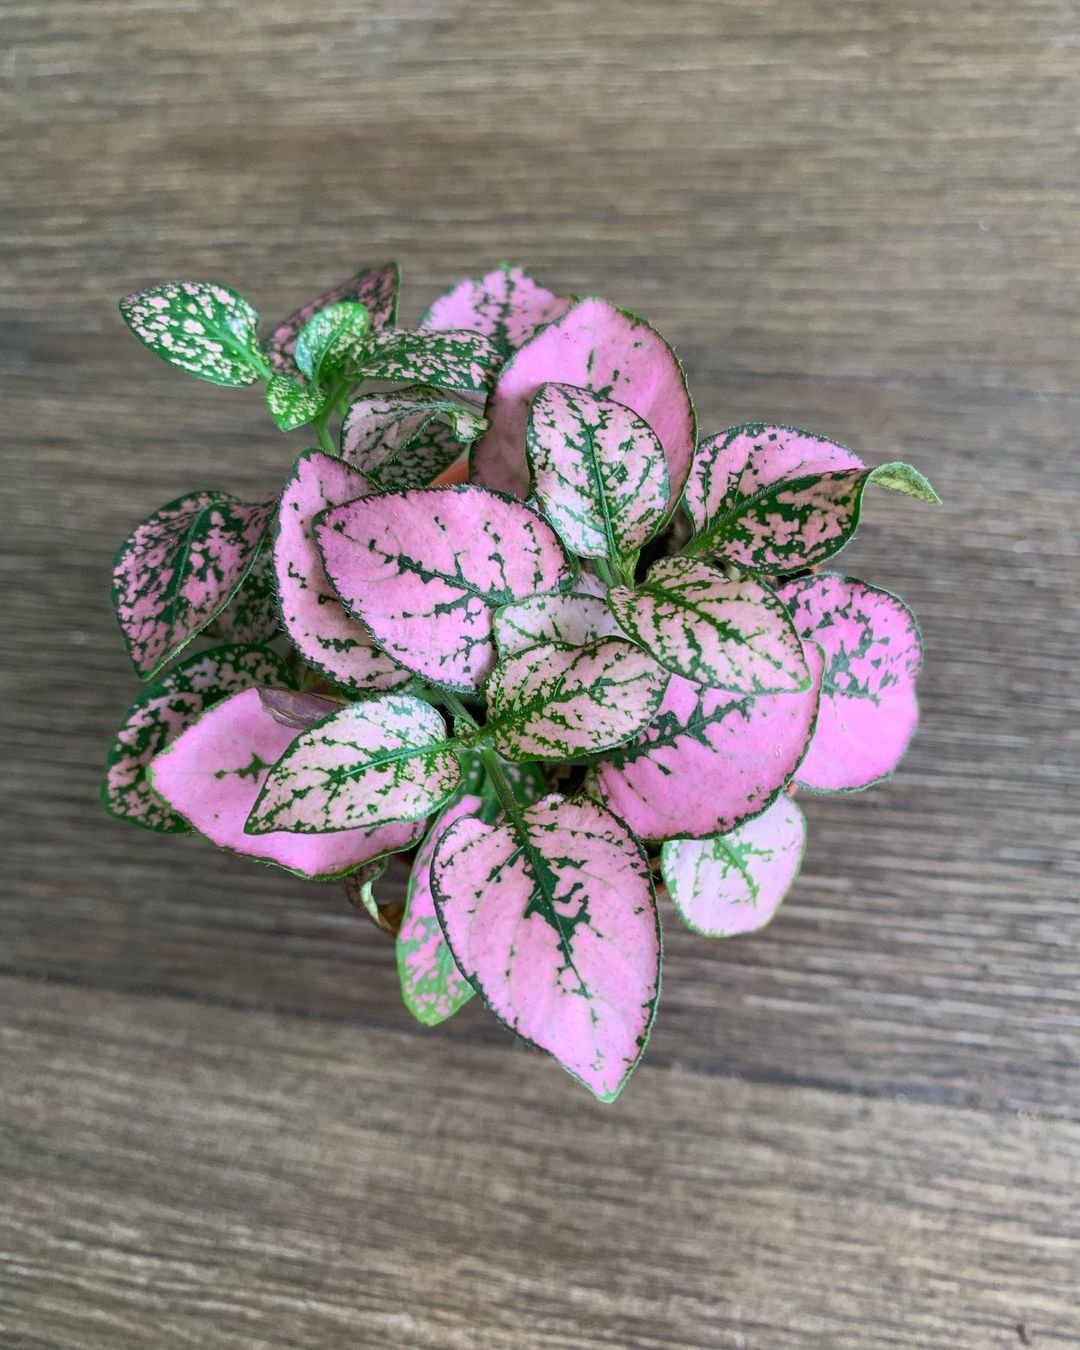 Pink-Polka-Dot-Plant 15 Pink Houseplants To Add A Pop of Color To Your Home